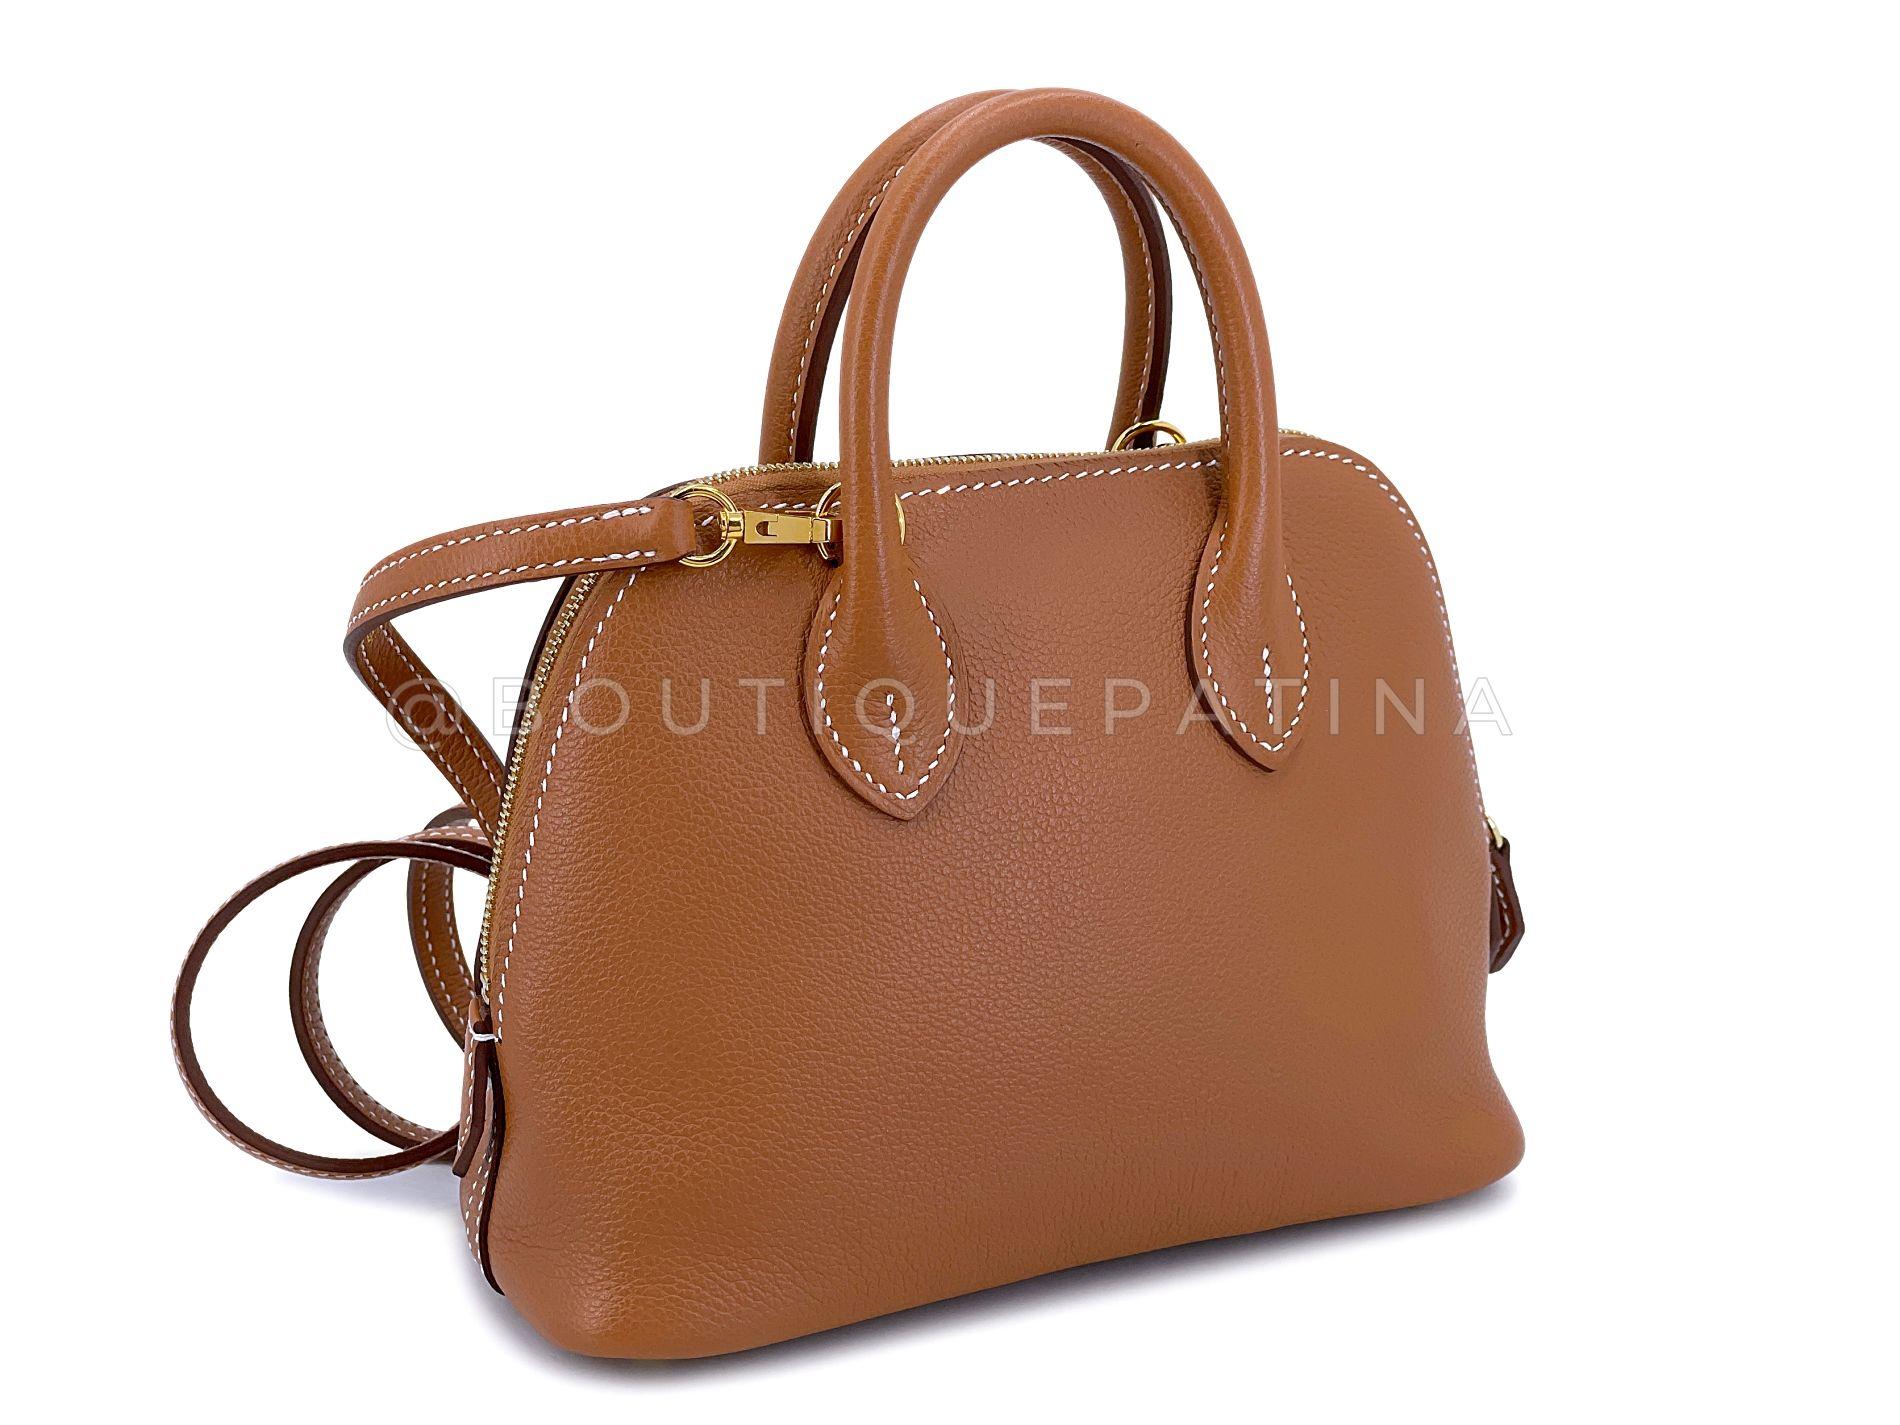 Store item: 67245
A classic, classic model, the Bolide has especially as of recent become an Hermes enthusiast favorite for its classic H look, understated elegance and versatility of removable shoulder strap. Any Hermes enthusiast knows the classic